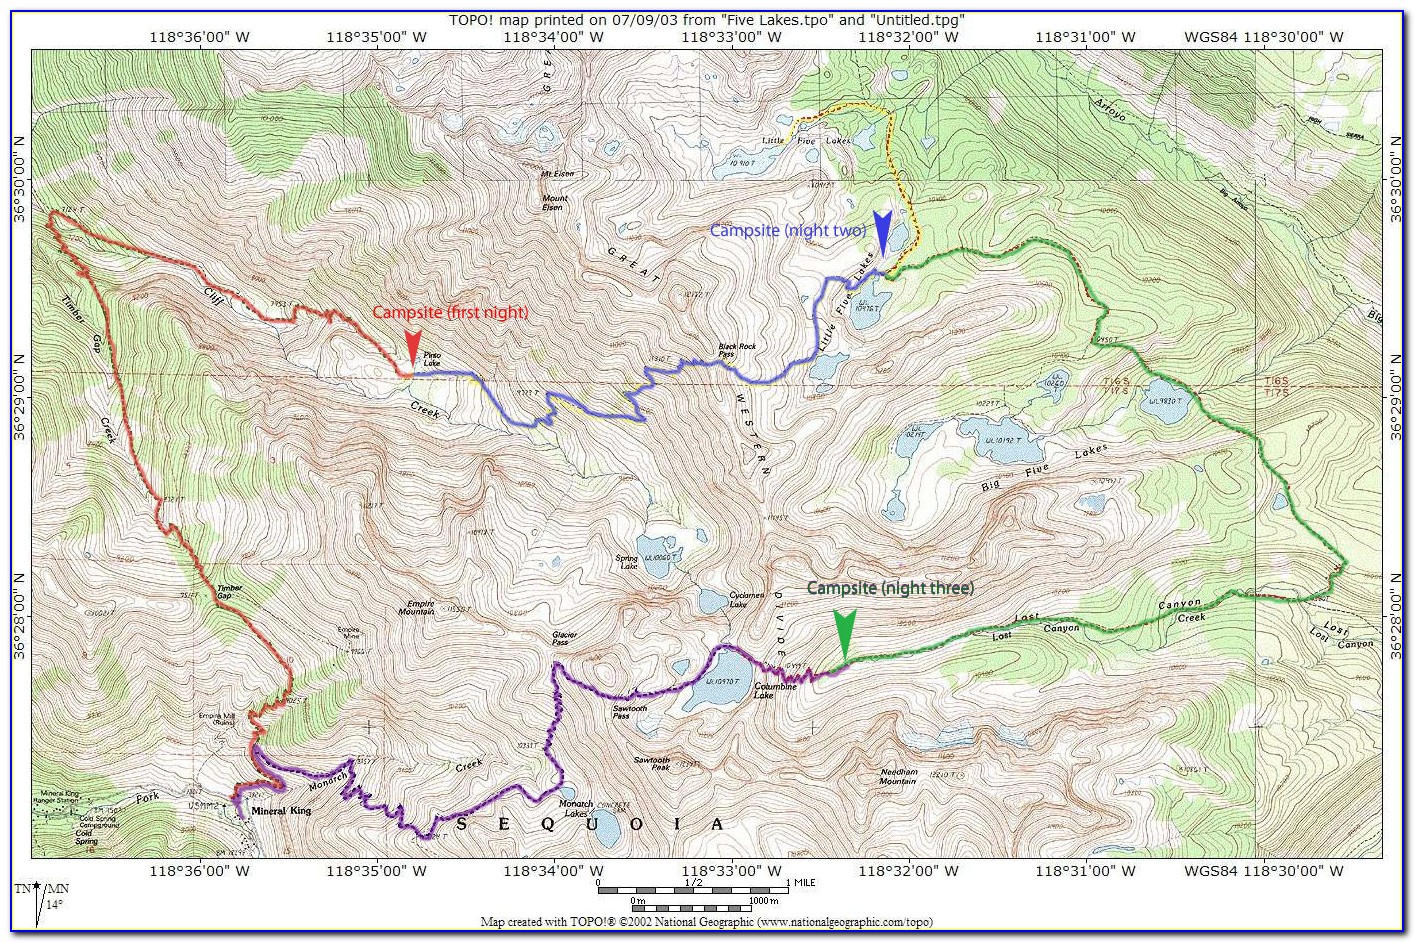 Sequoia National Park Hiking Map Pdf